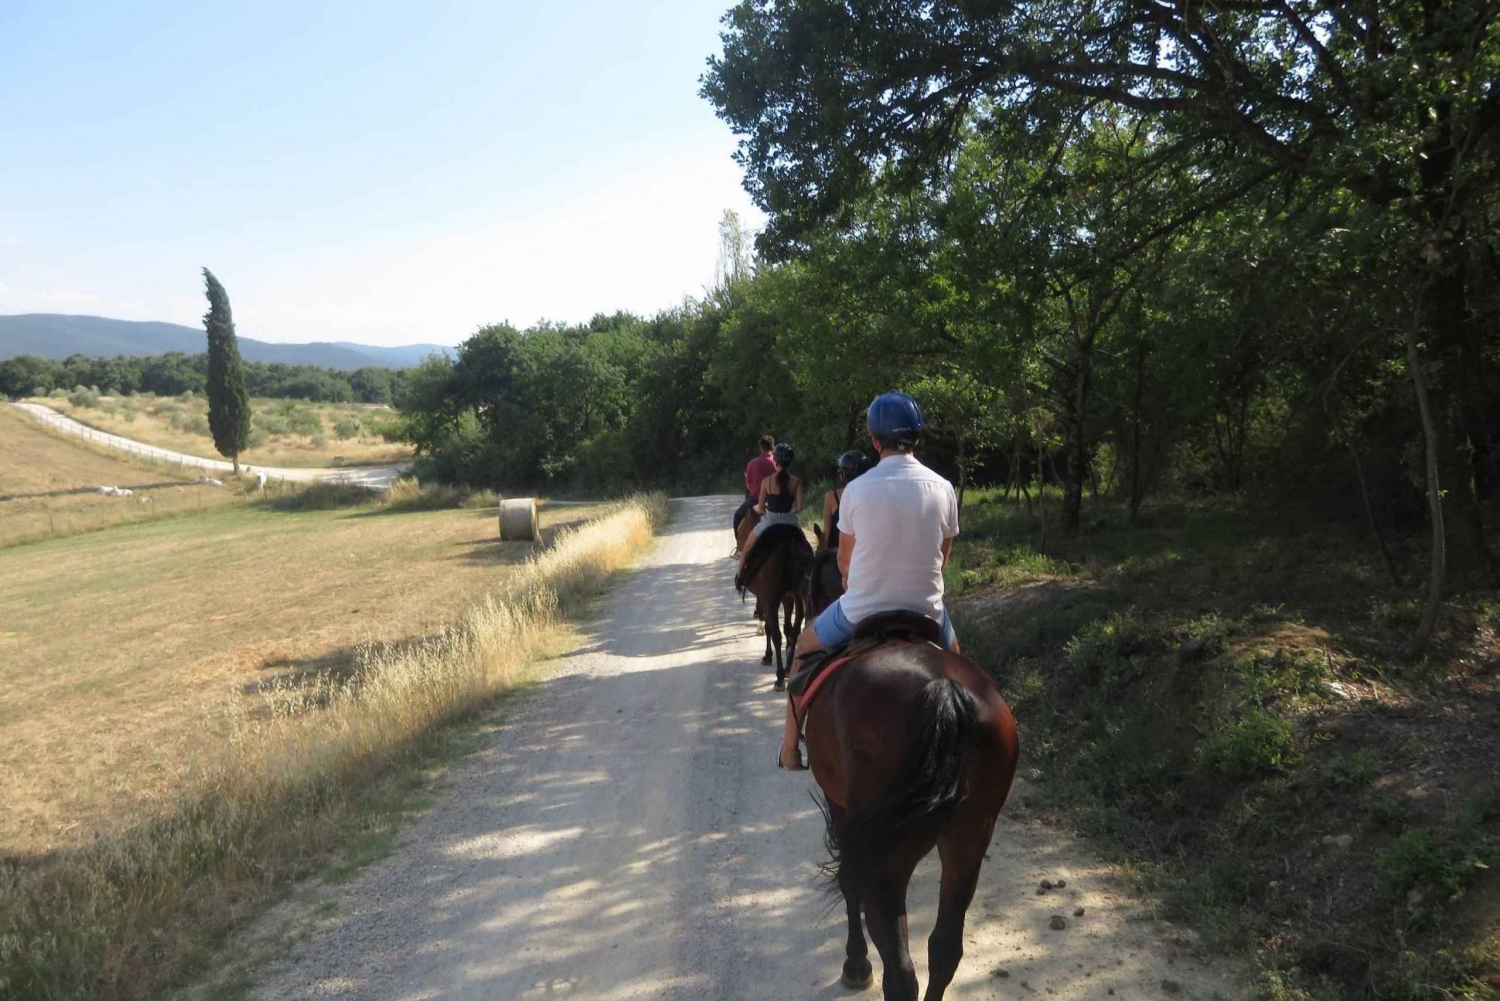 Tuscany: Horseback Riding Adventure with Lunch in a Winery